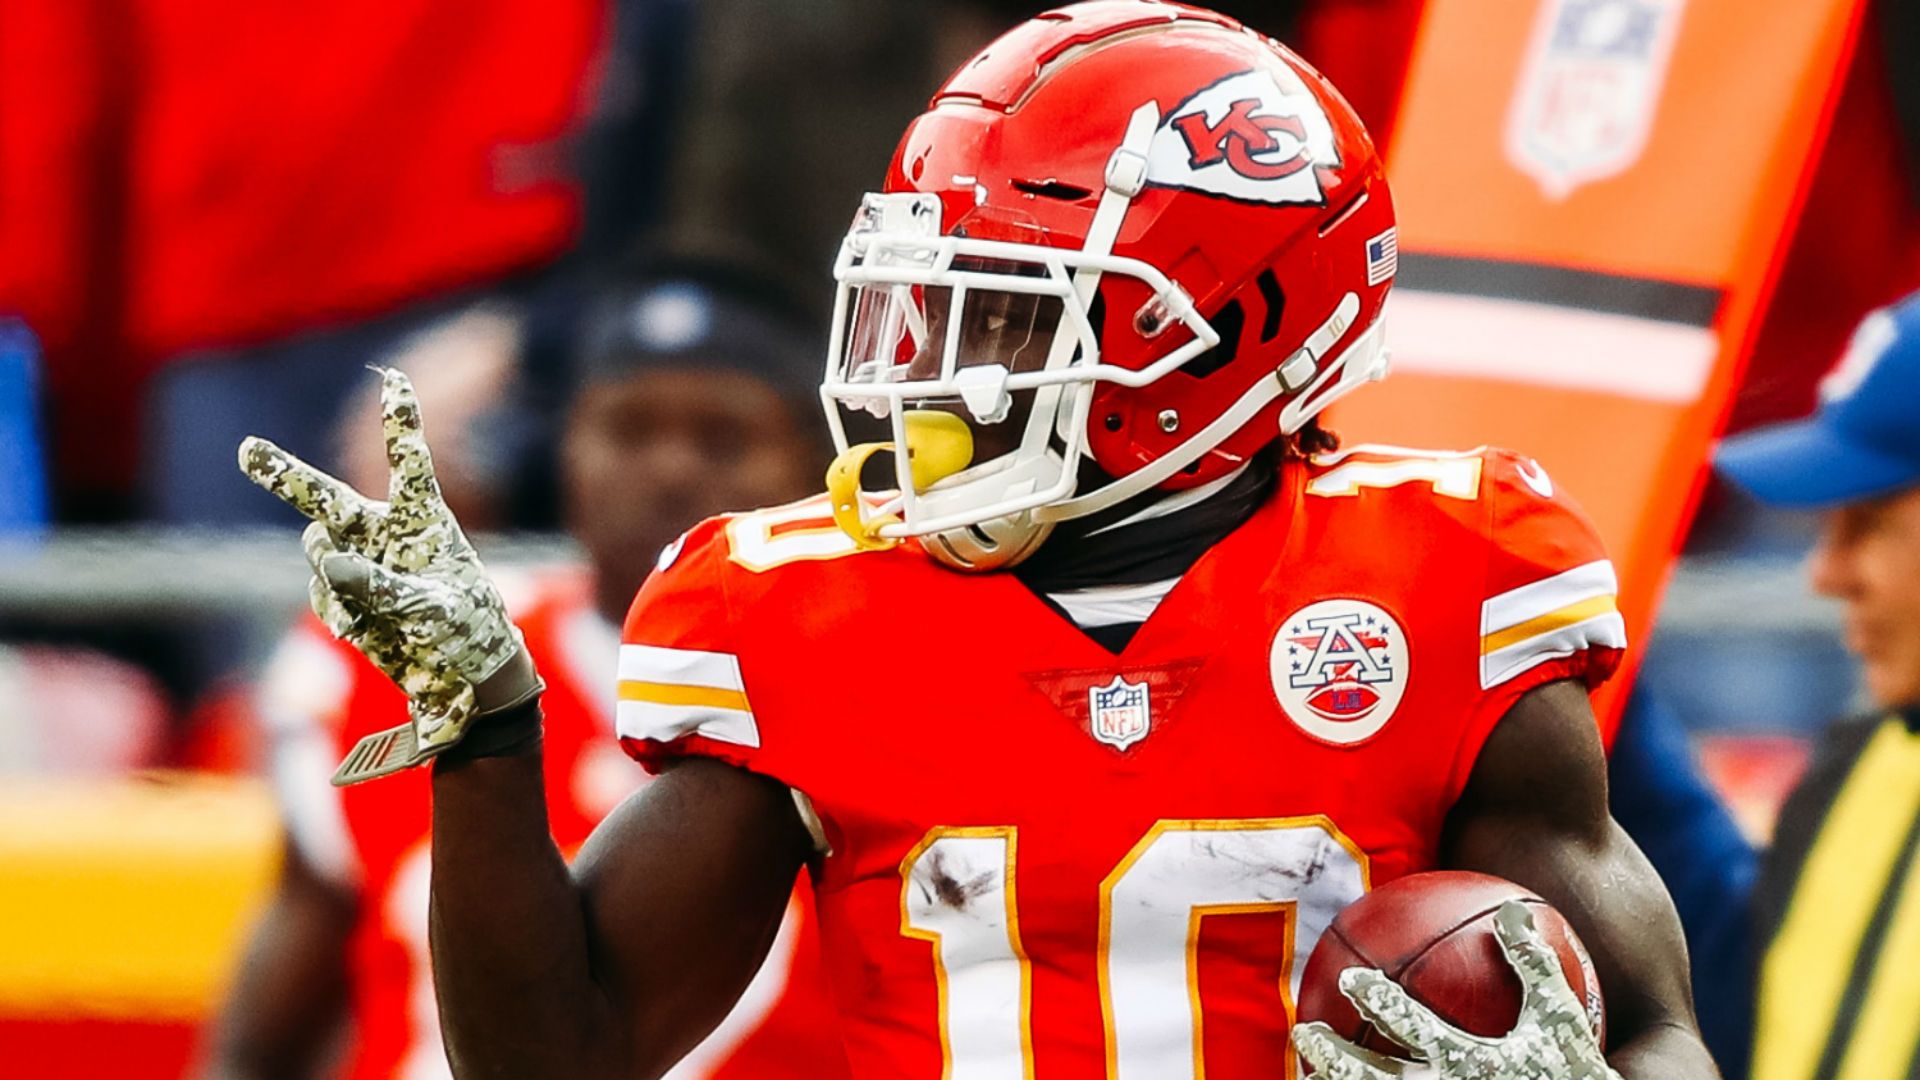 Tyreek Hill's timeline of trouble: From a domestic violence arrest in college to child abuse investigation with Chiefs